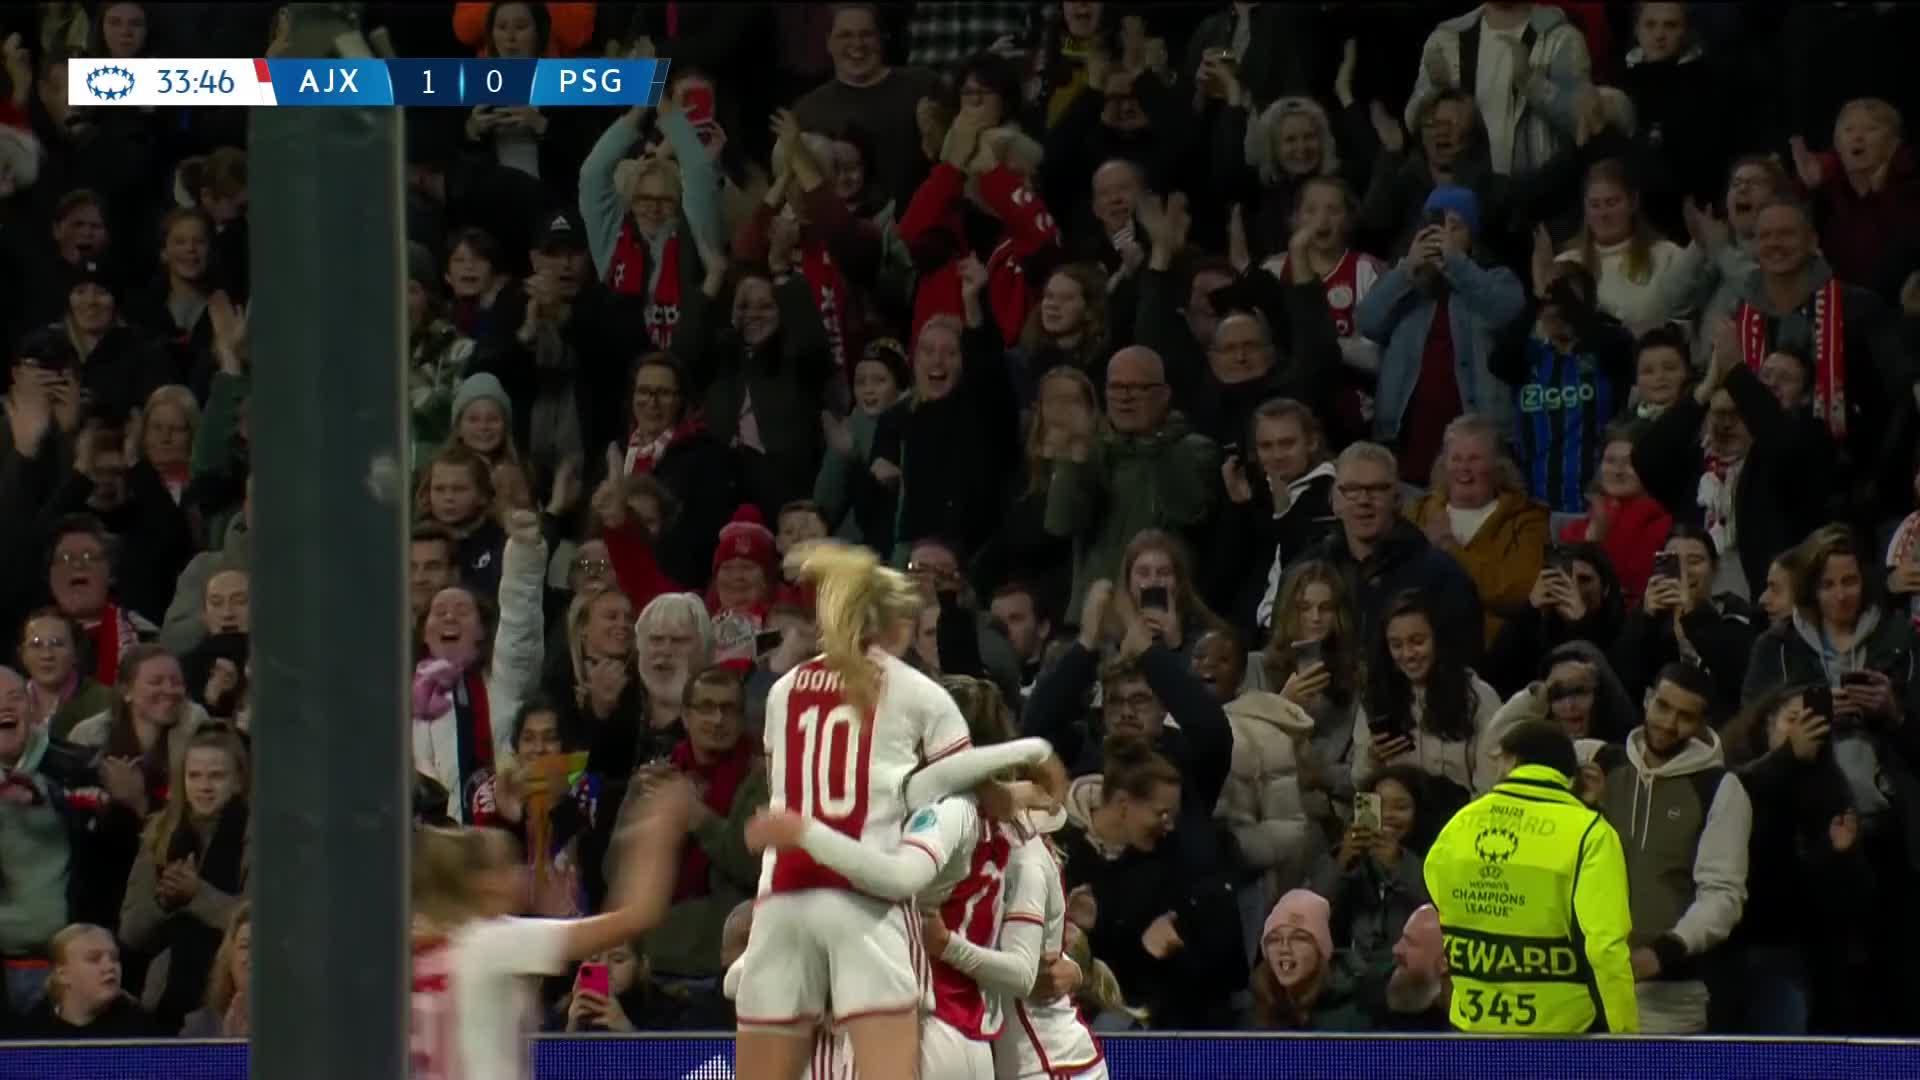 Tiny Hoekstra cleans up in front of goal and Ajax is ahead 💥It's a first UWCL goal for the Dutch forward 🇳🇱🏴󠁧󠁢󠁥󠁮󠁧󠁿 🎙️ 👉   🇫🇷 🎙️ 👉   🇳🇱 🎙️ 👉